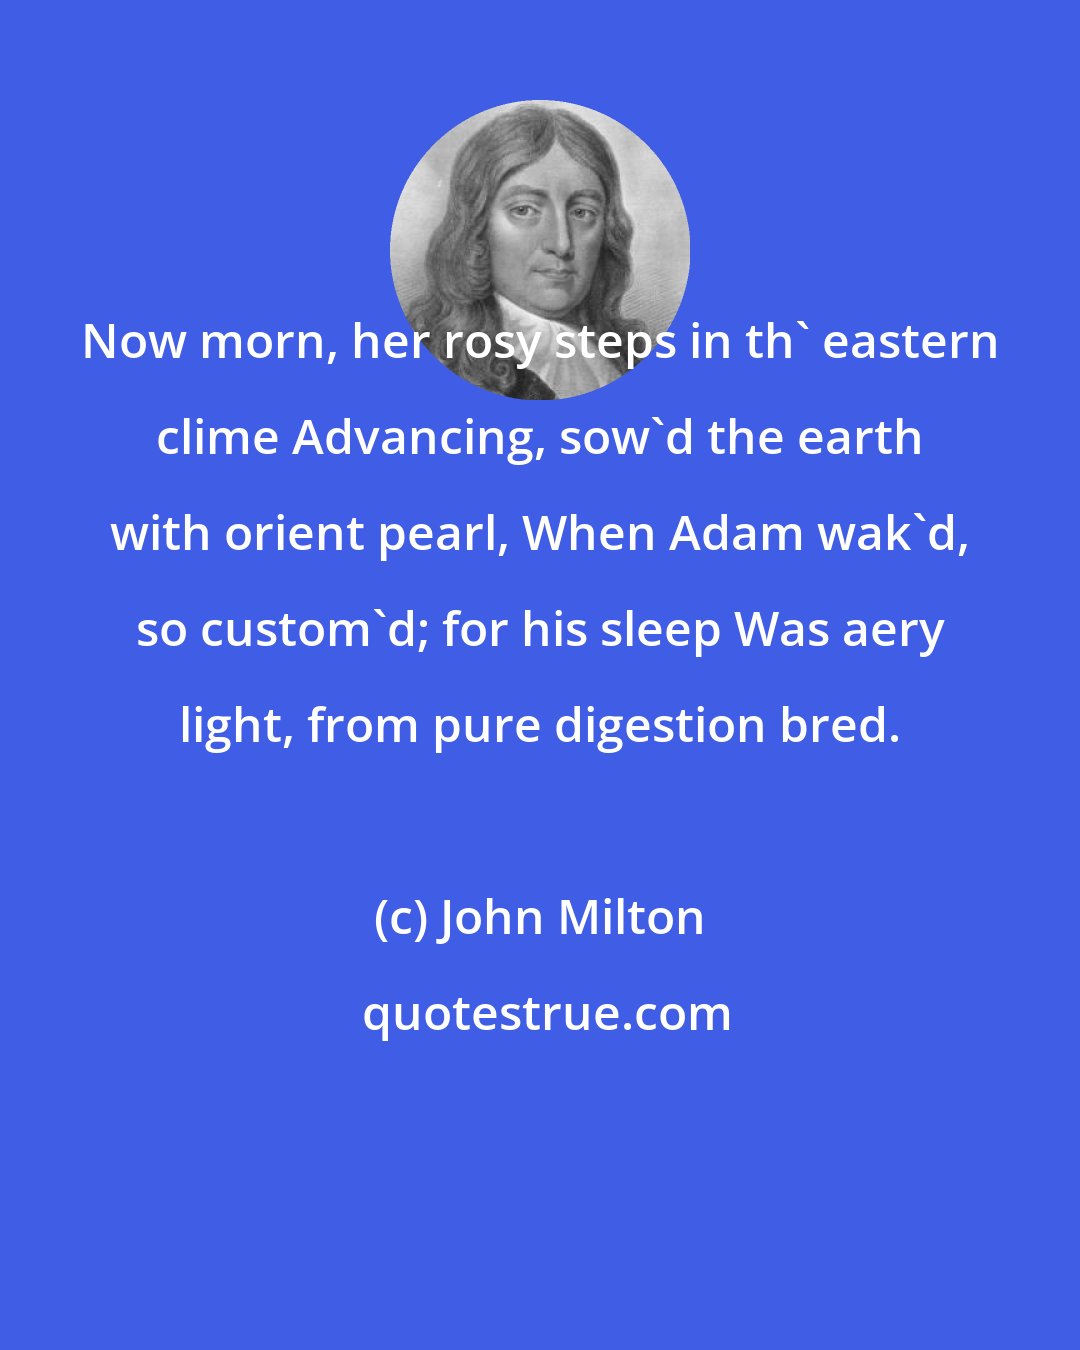 John Milton: Now morn, her rosy steps in th' eastern clime Advancing, sow'd the earth with orient pearl, When Adam wak'd, so custom'd; for his sleep Was aery light, from pure digestion bred.